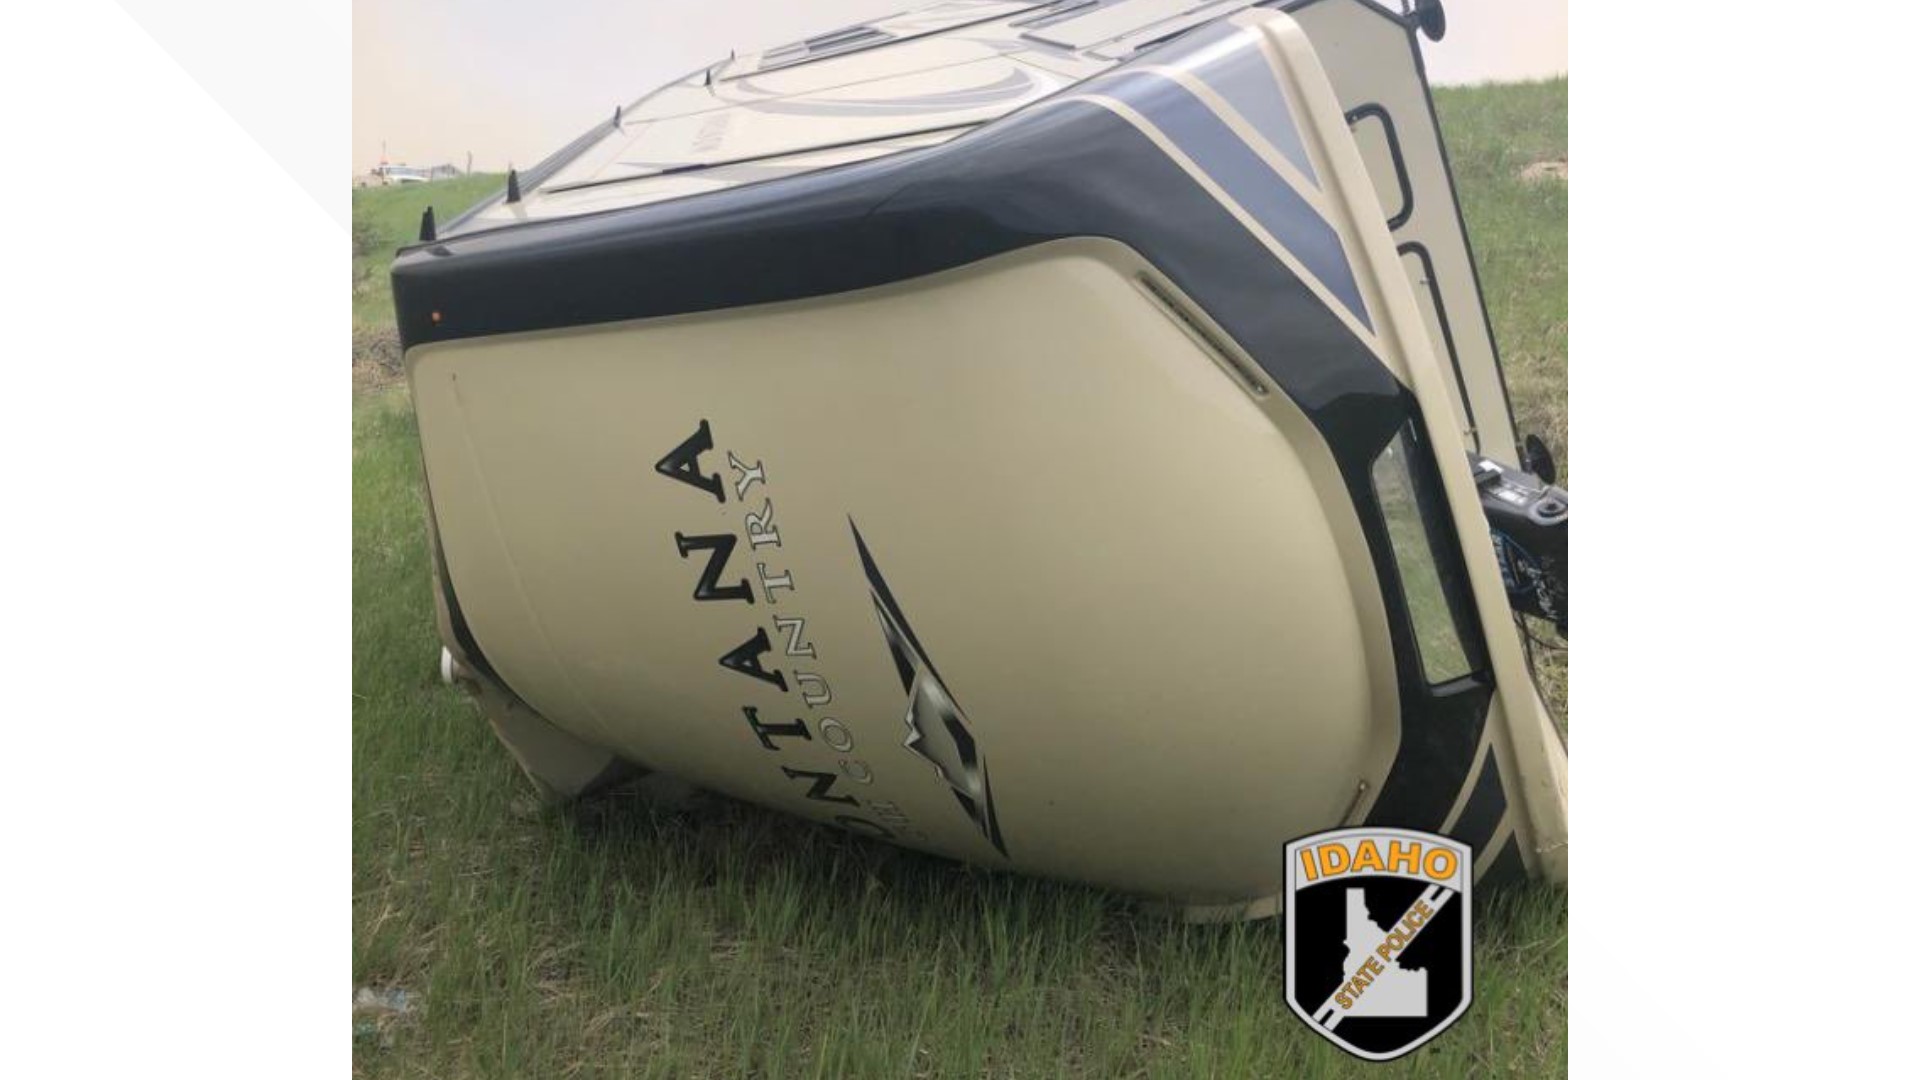 In crashes on I-84 and Highway 26, ISP says trailers overturned in severe winds Thursday afternoon.